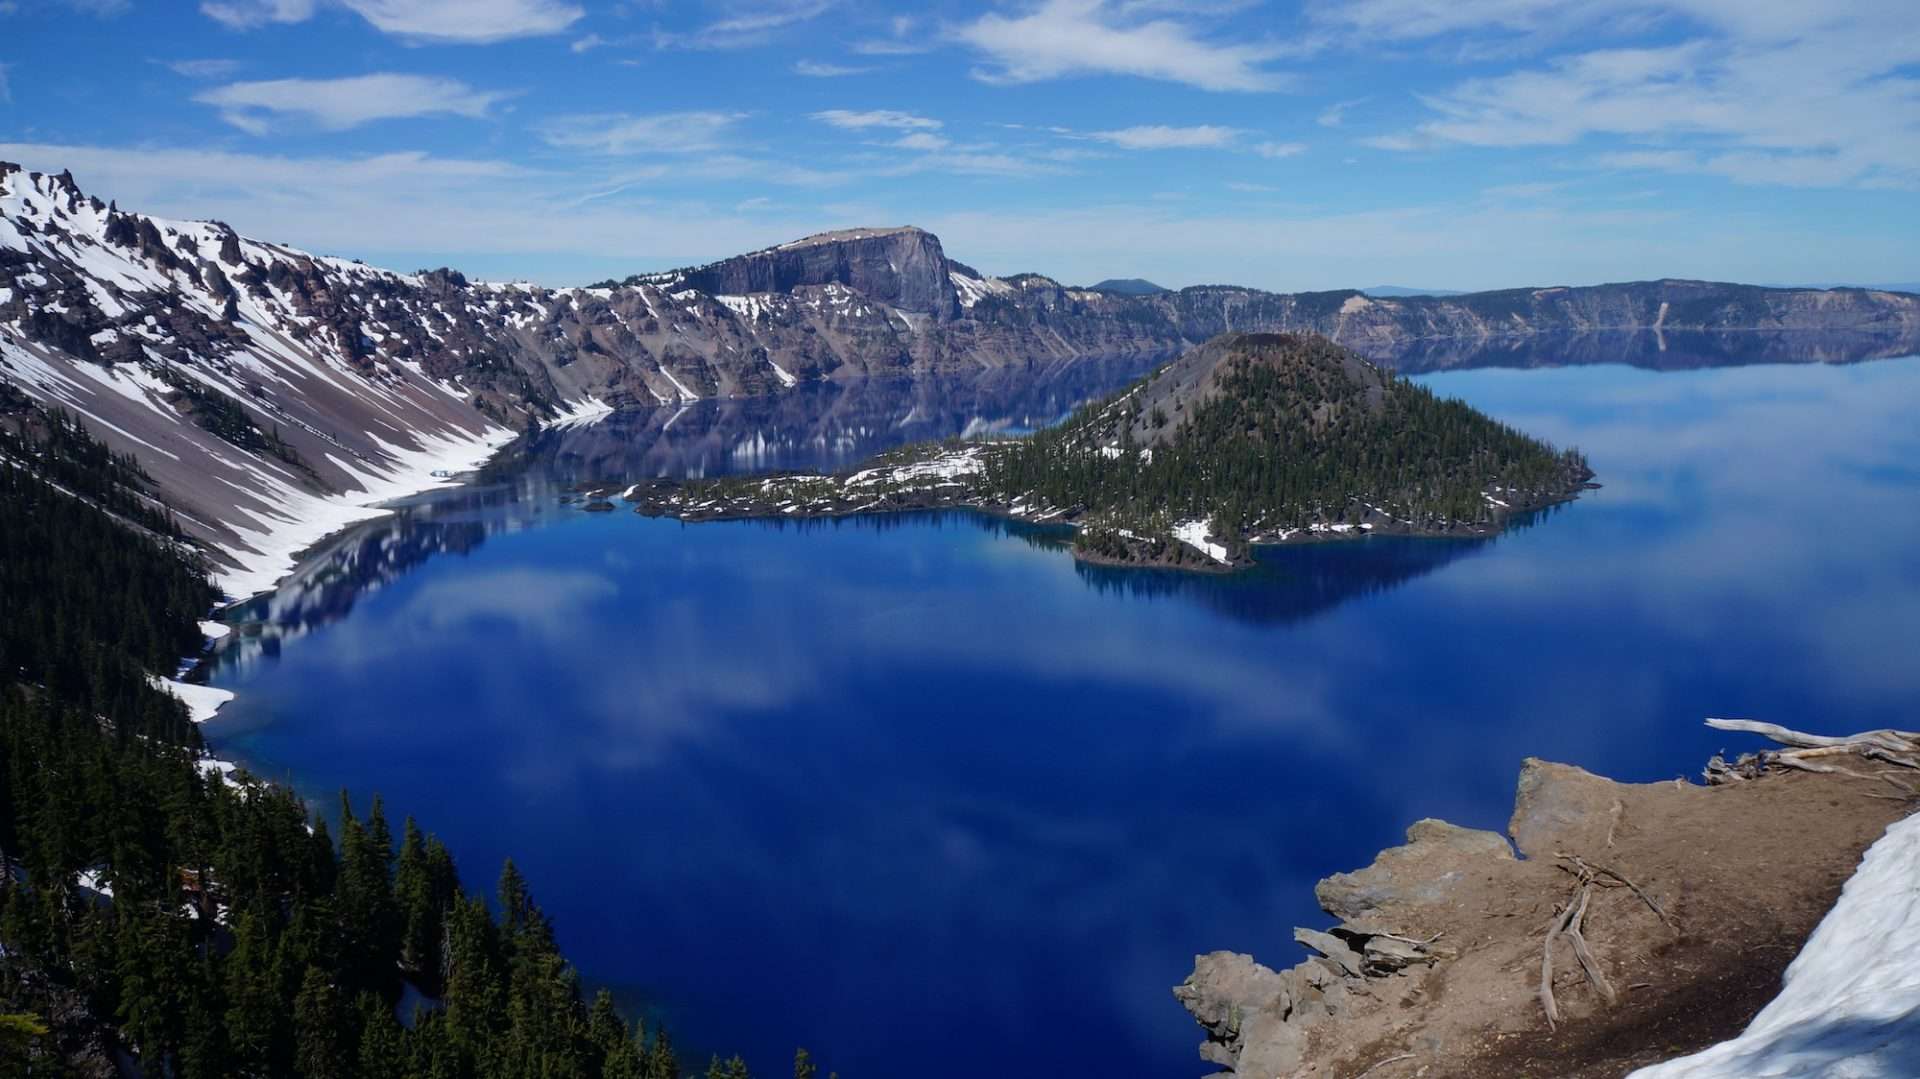 wizard island in crater lake